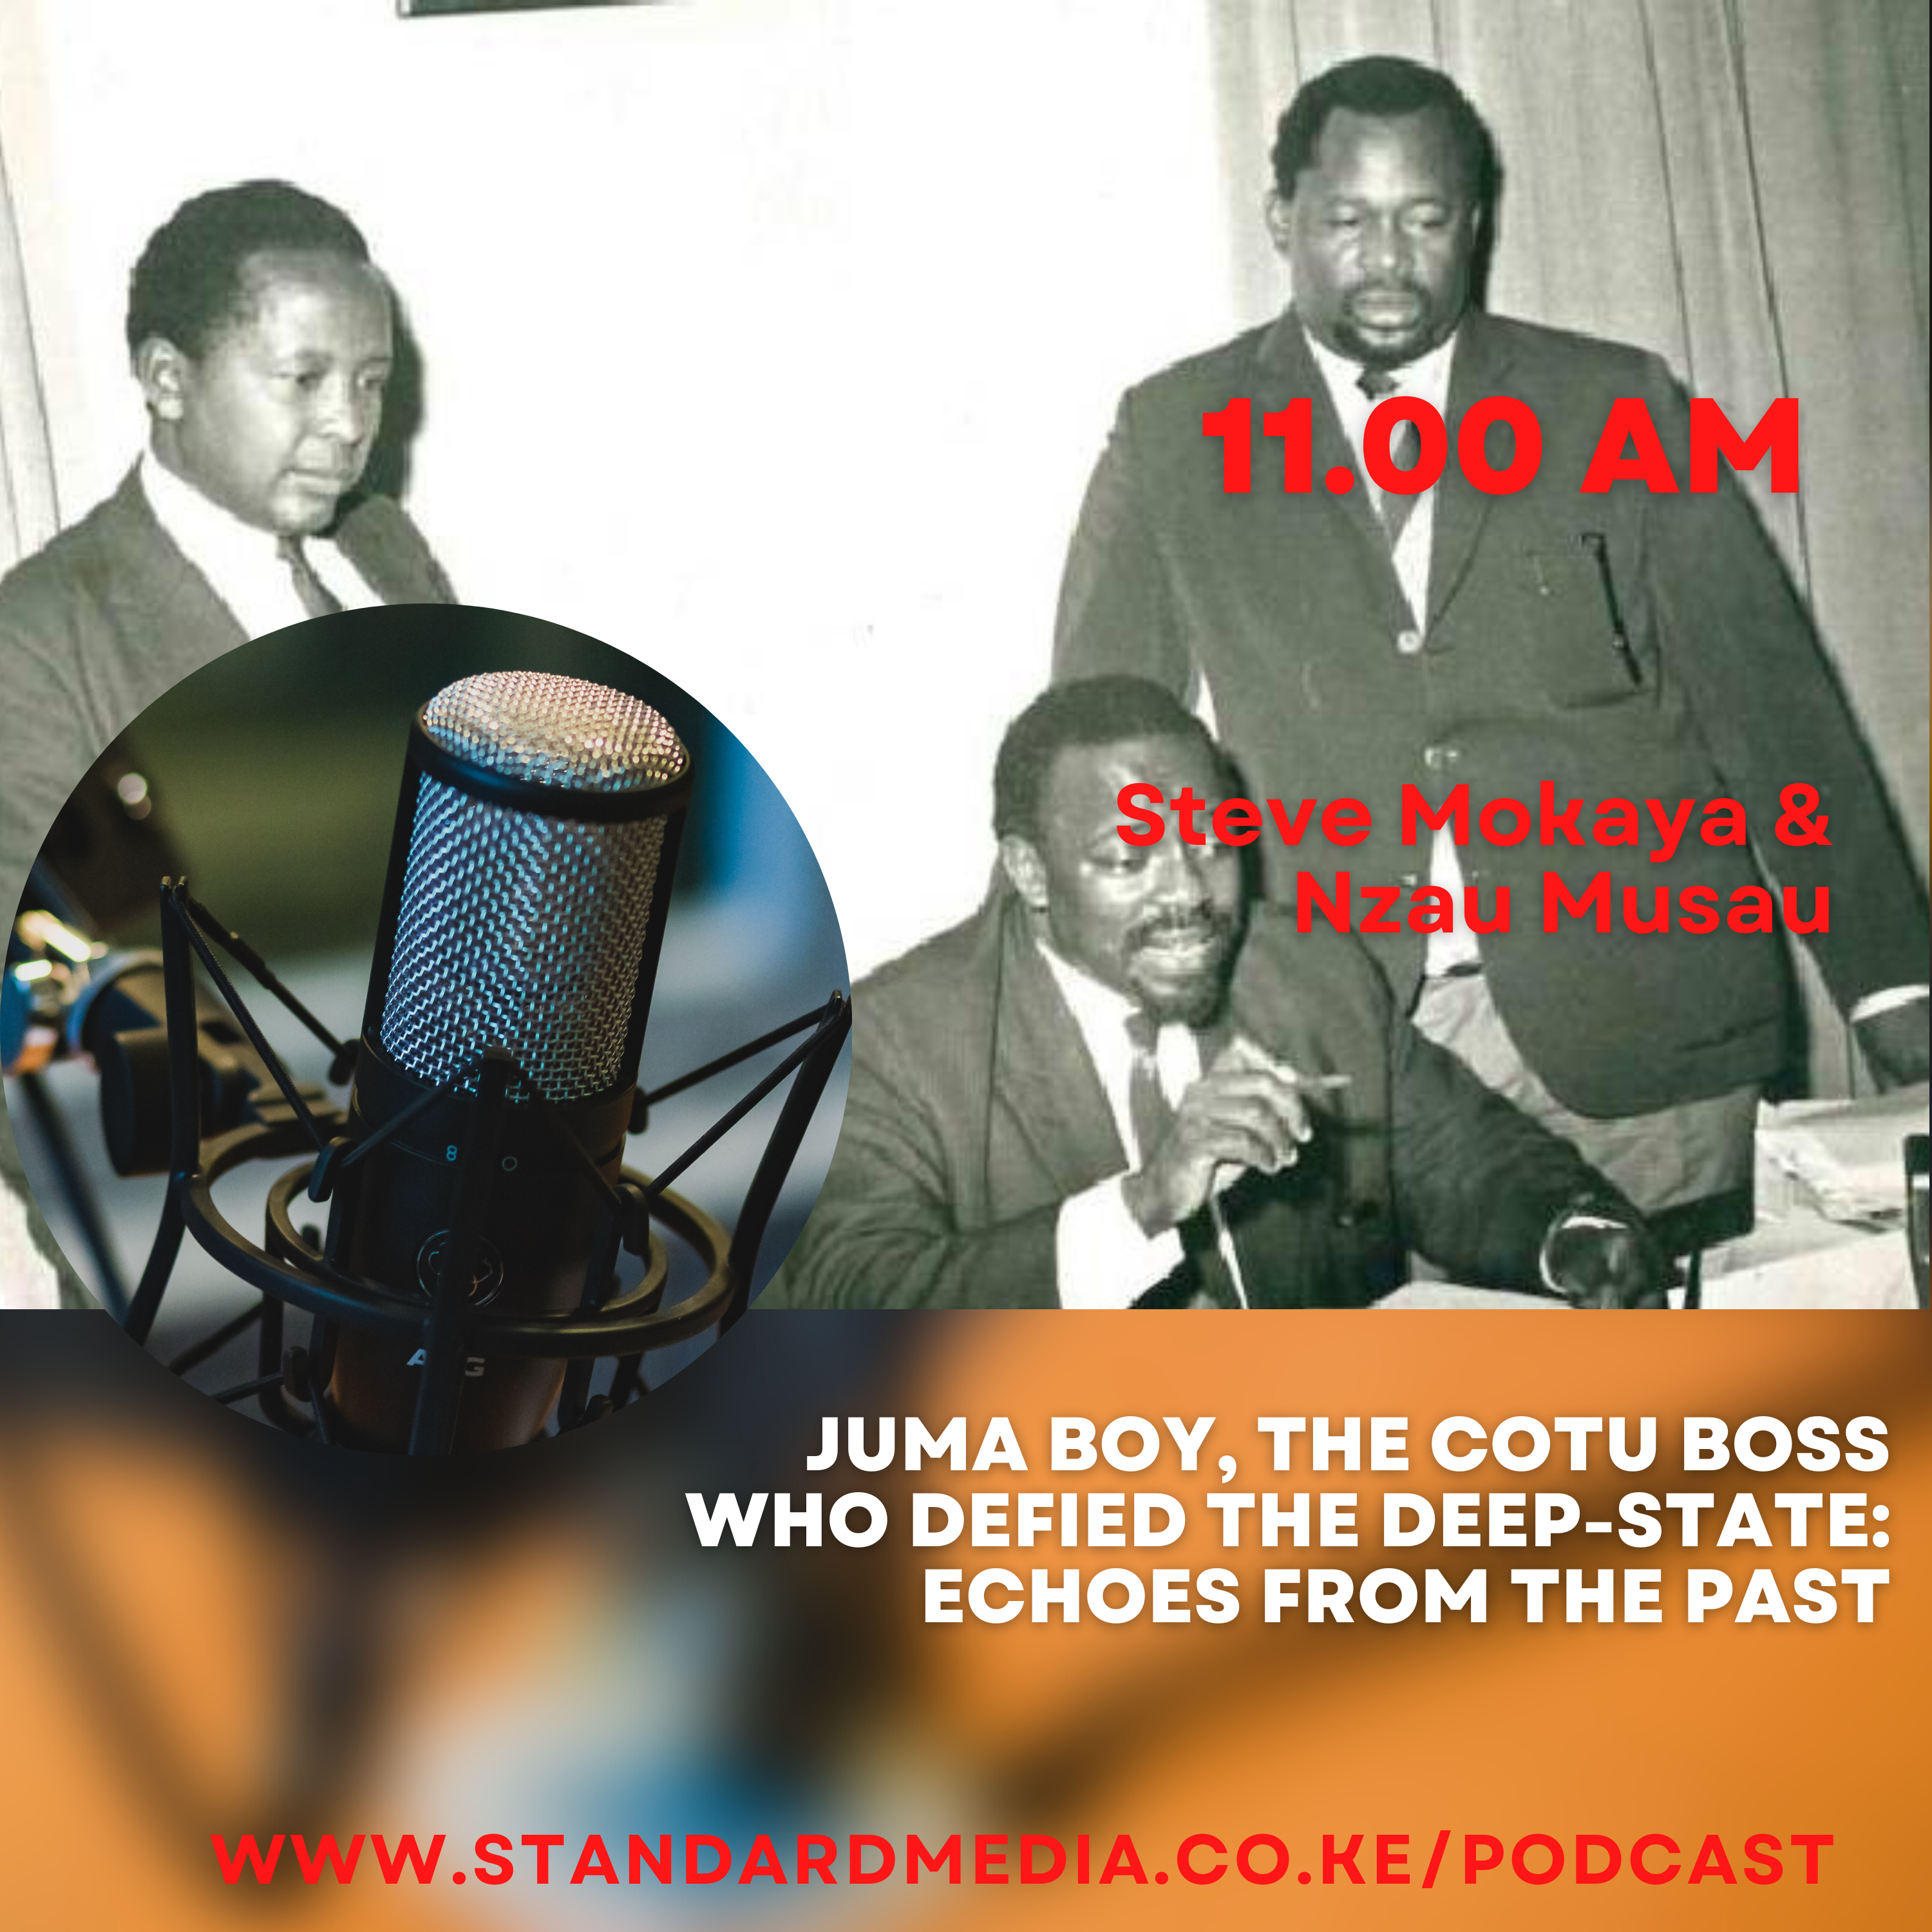 Juma Boy, the COTU Boss who defied deep-state commands: Echoes from the past podcast